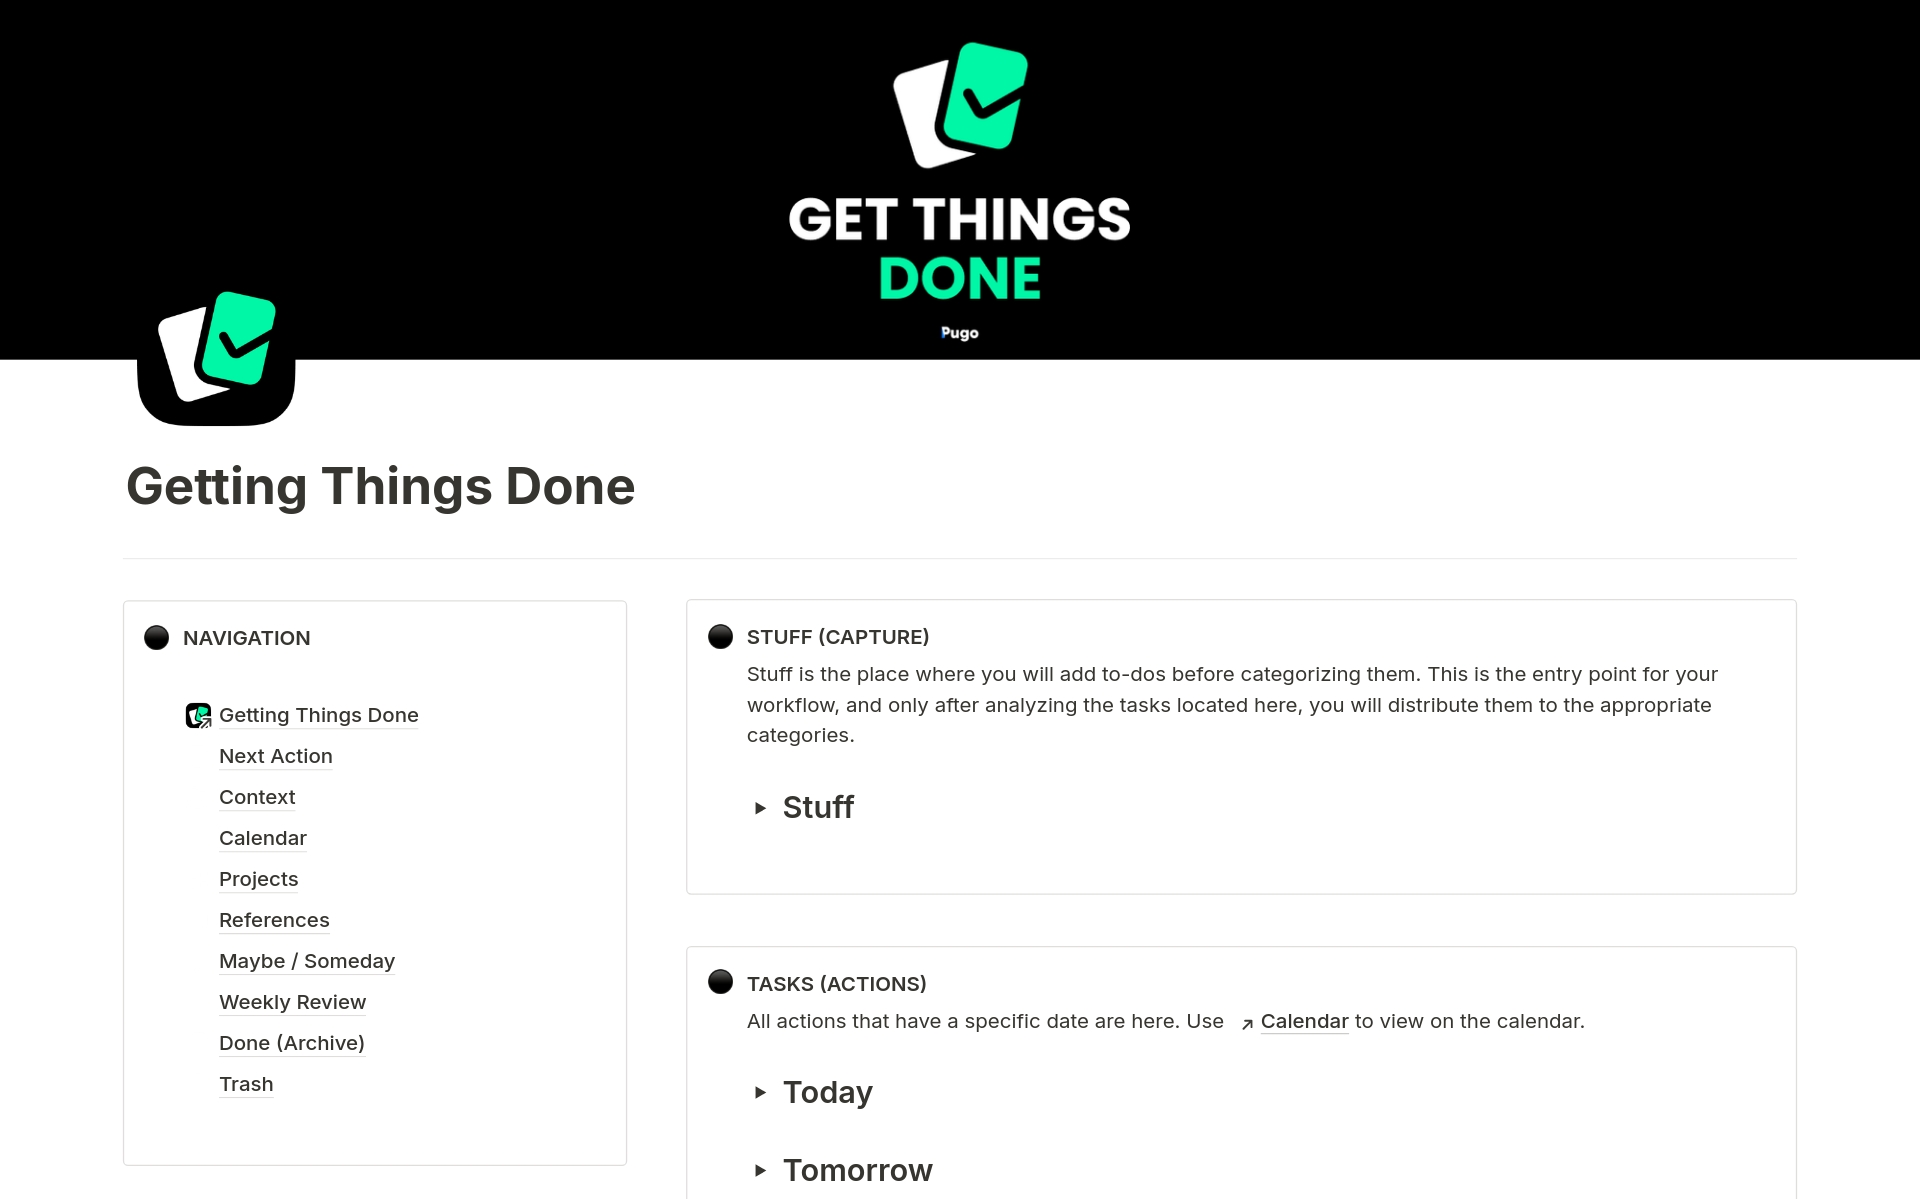 The Notion GTD Template You Need to Boost Productivity
From Overwhelmed to Organized.